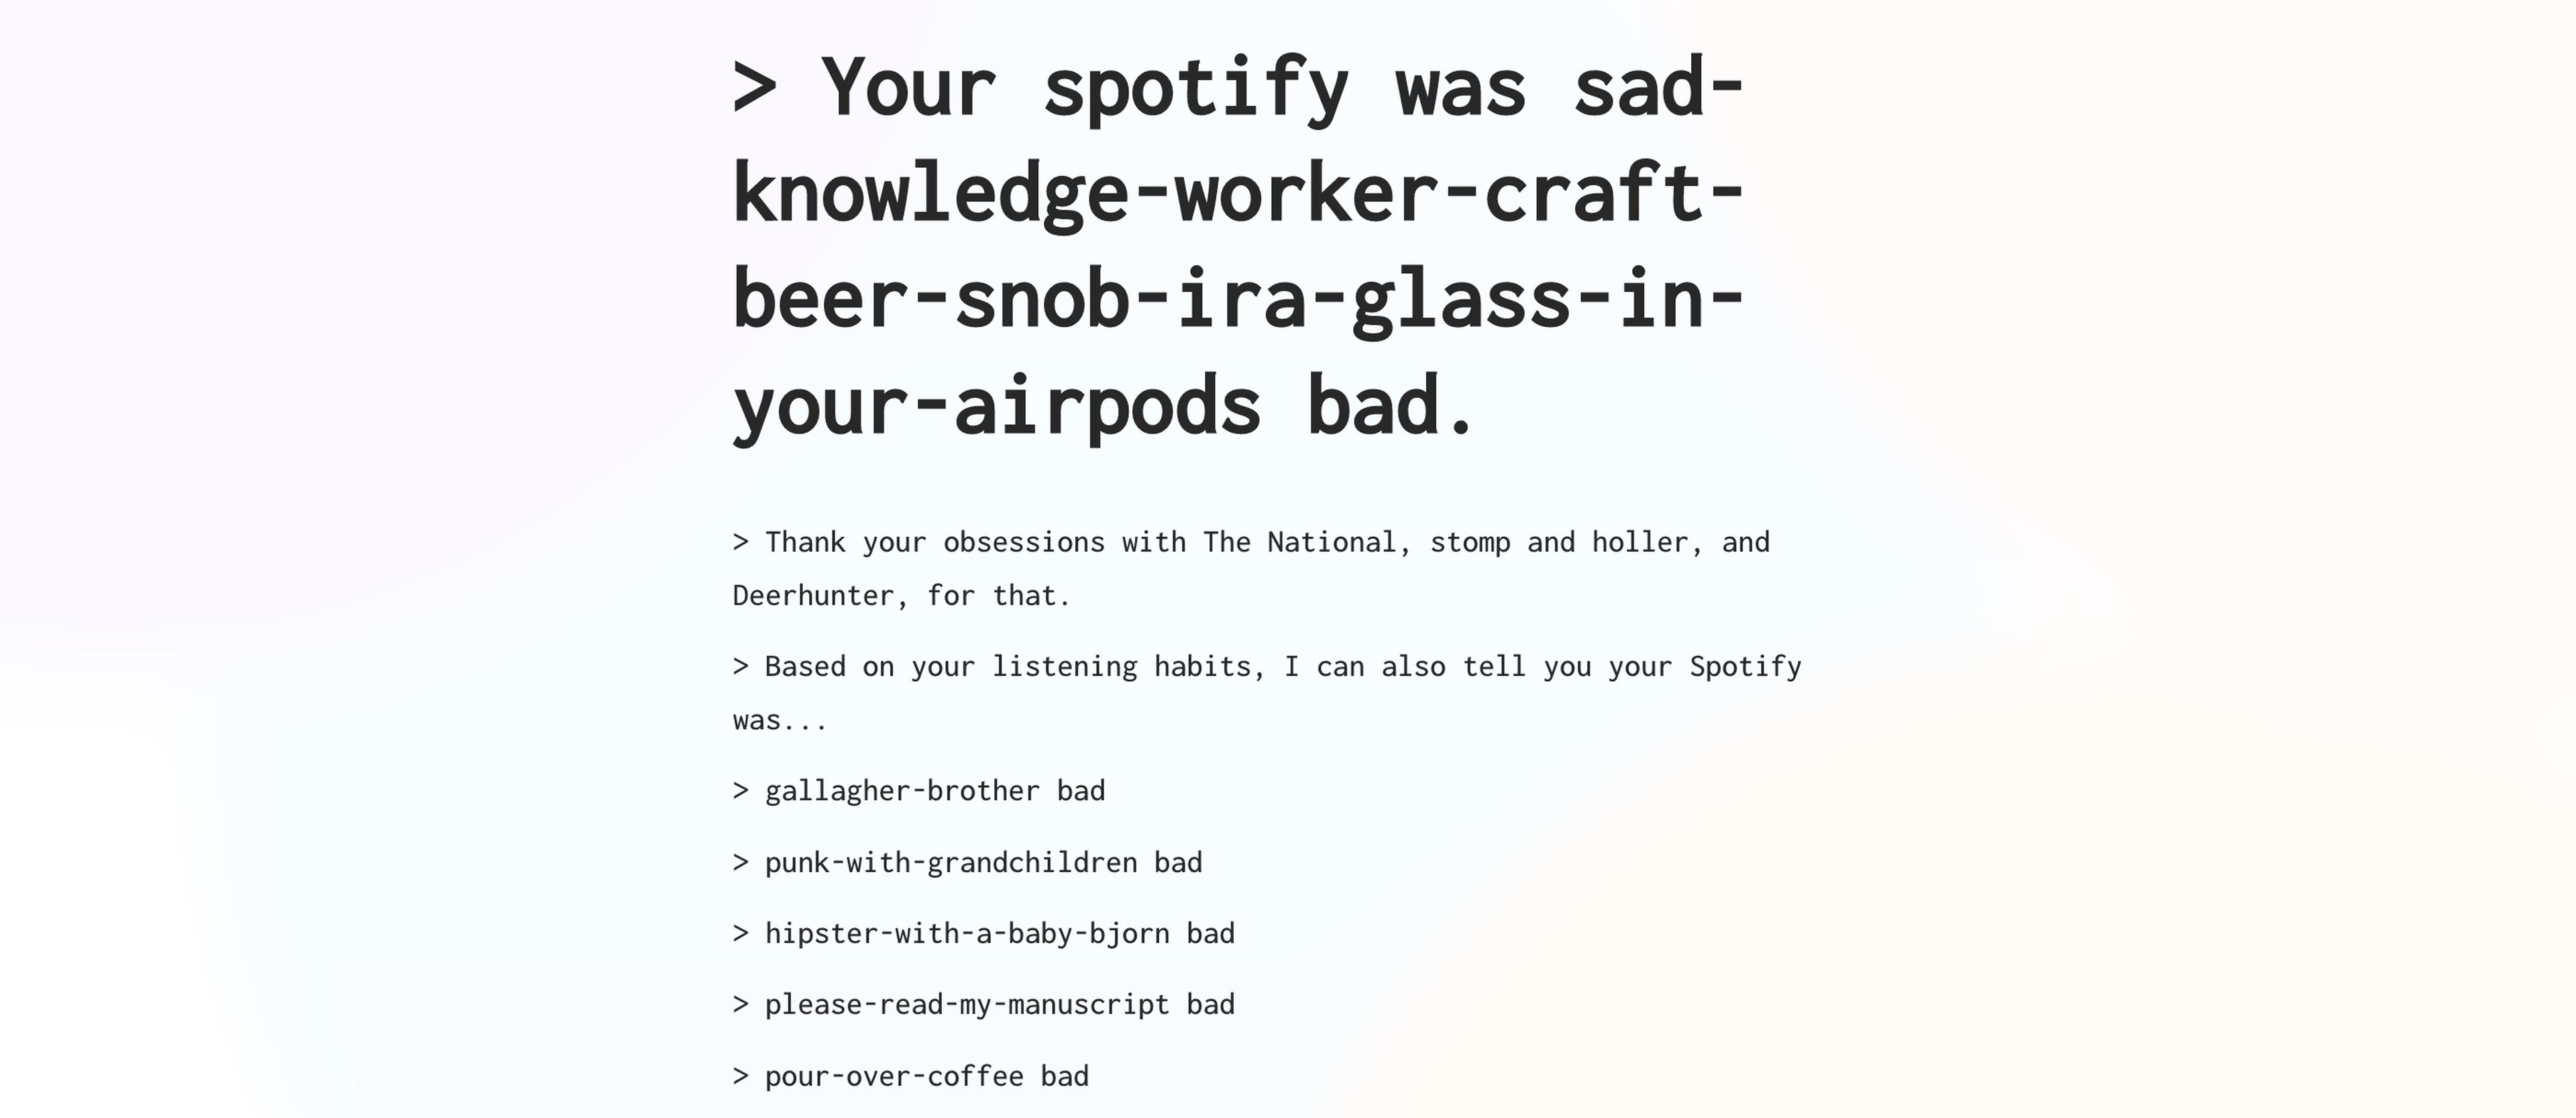 how bad is your Spotify